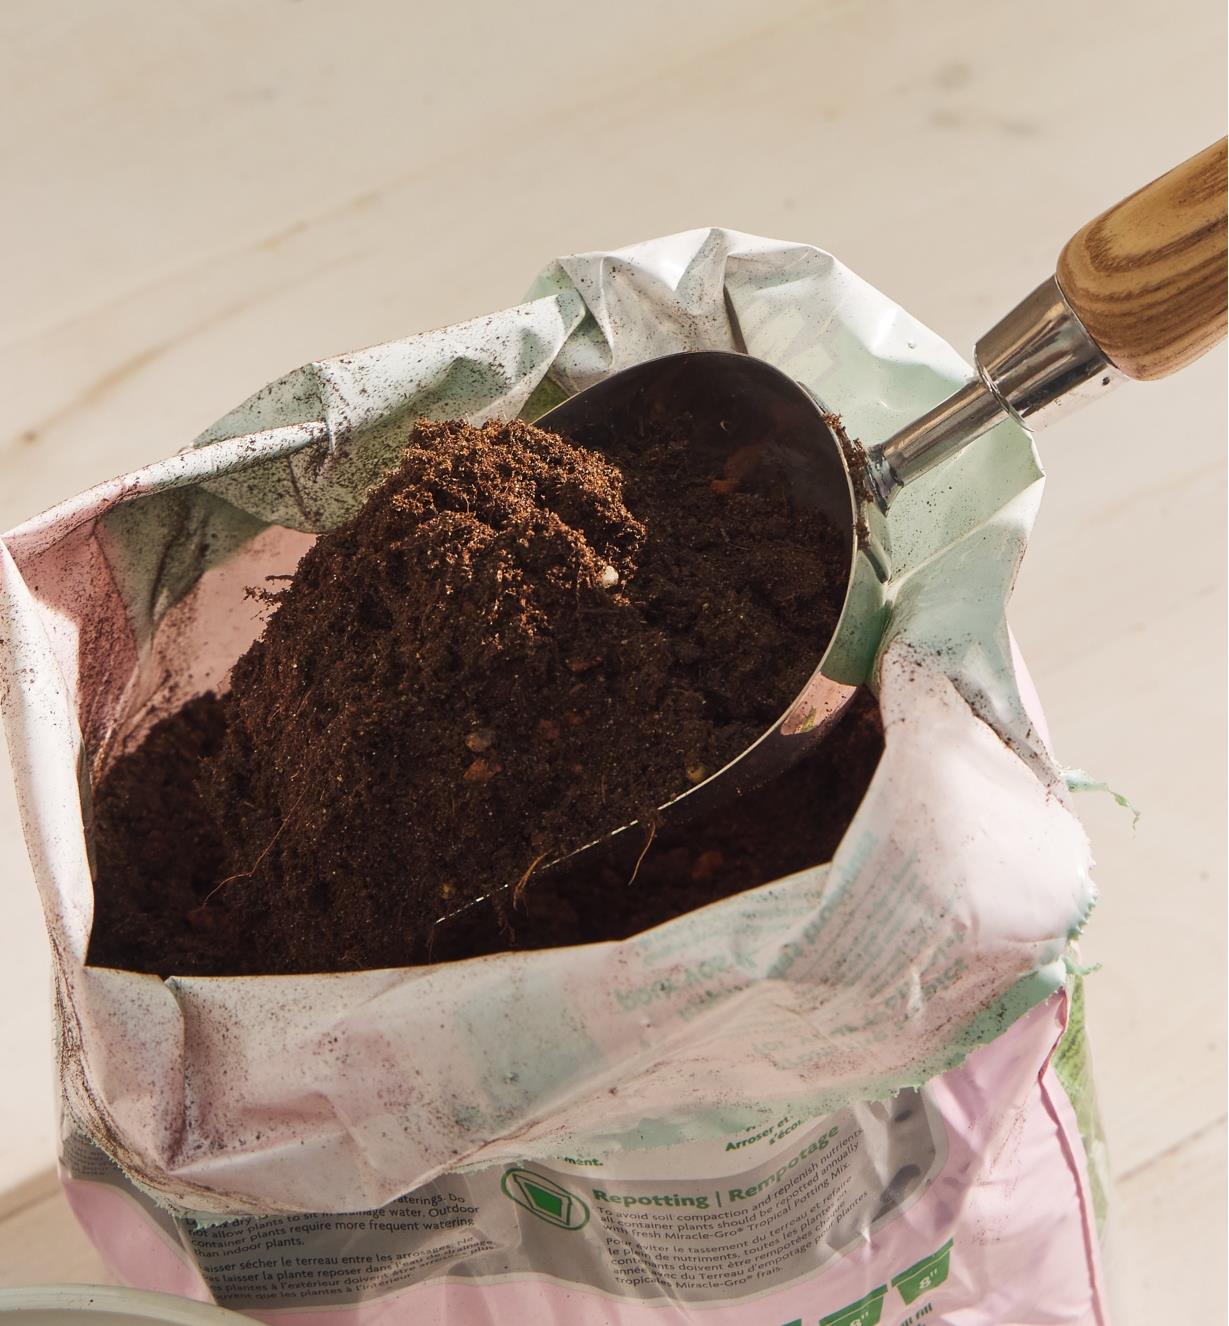 Using a stainless-steel scoop to dig soil out of a bag